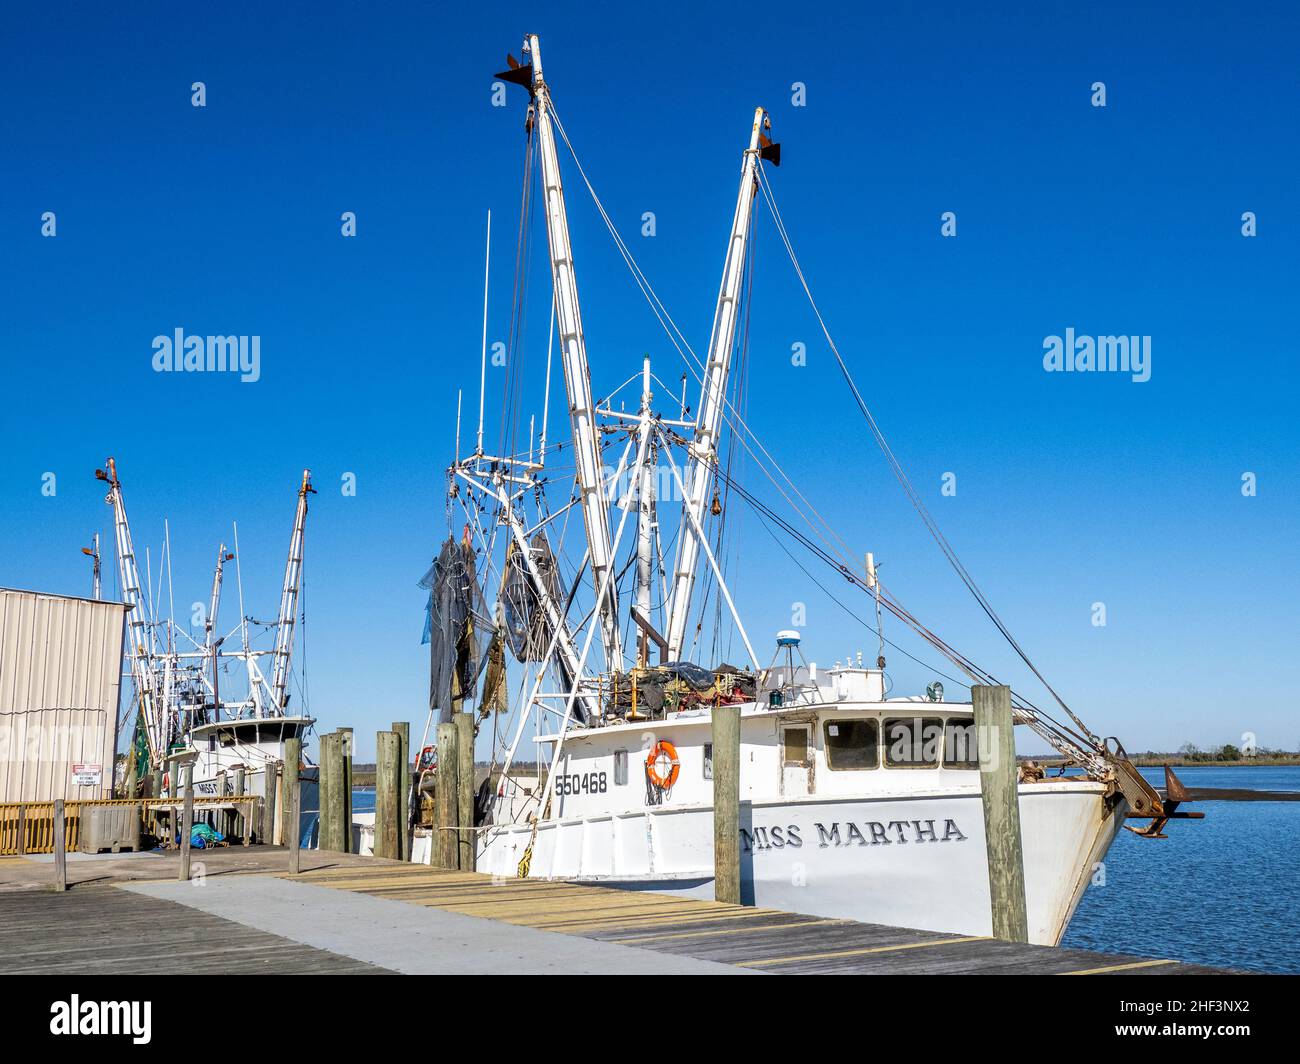 Shrimp boatat dock in Apalachicola River in Apalachicola in the panhandle area of Florida USA Stock Photo